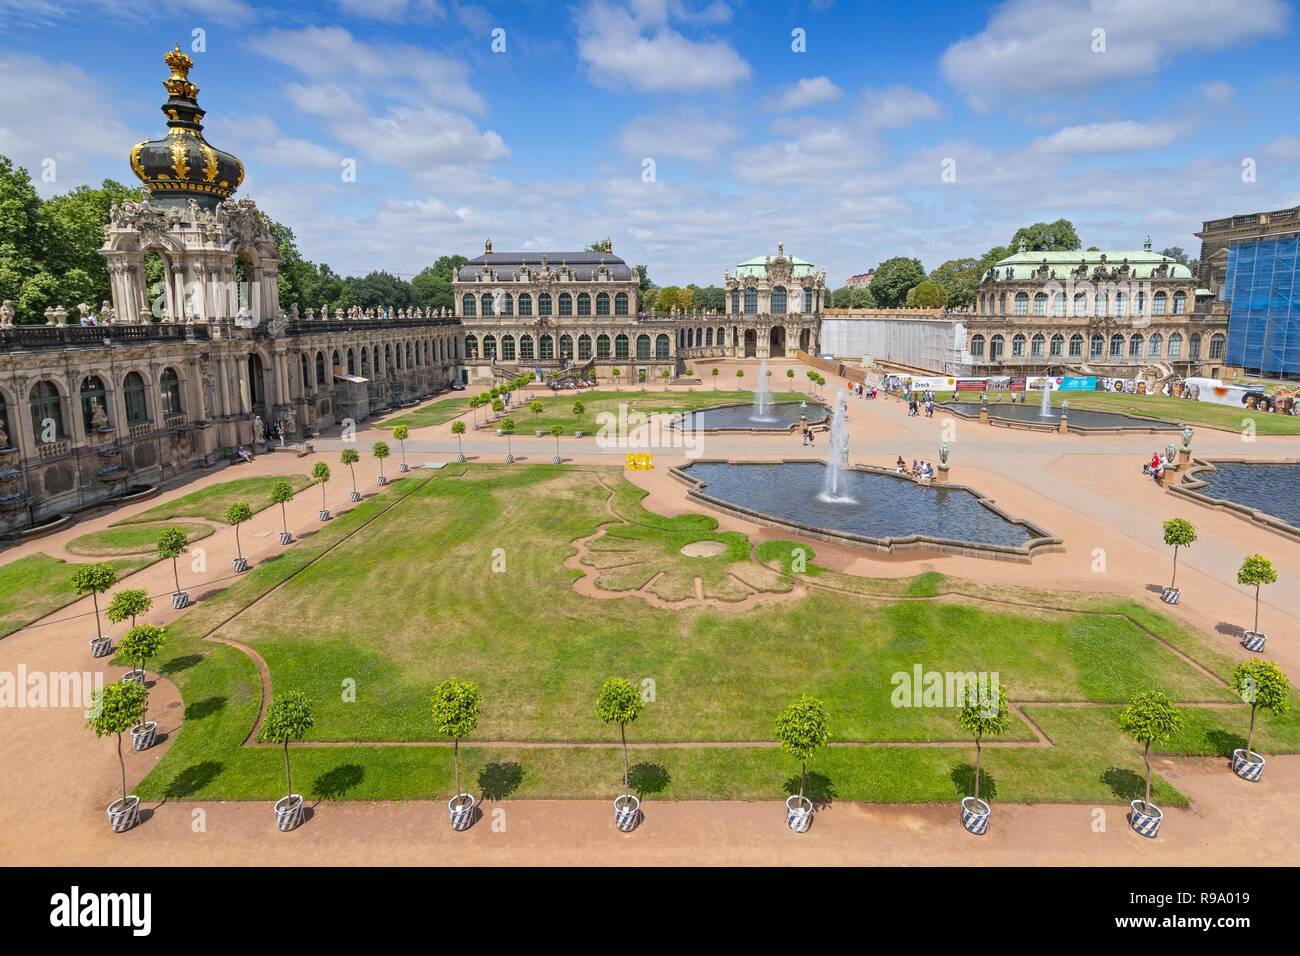 The Dresdner Zwinger, palace in the German city of Dresden, built in Baroque style, Germany. Stock Photo